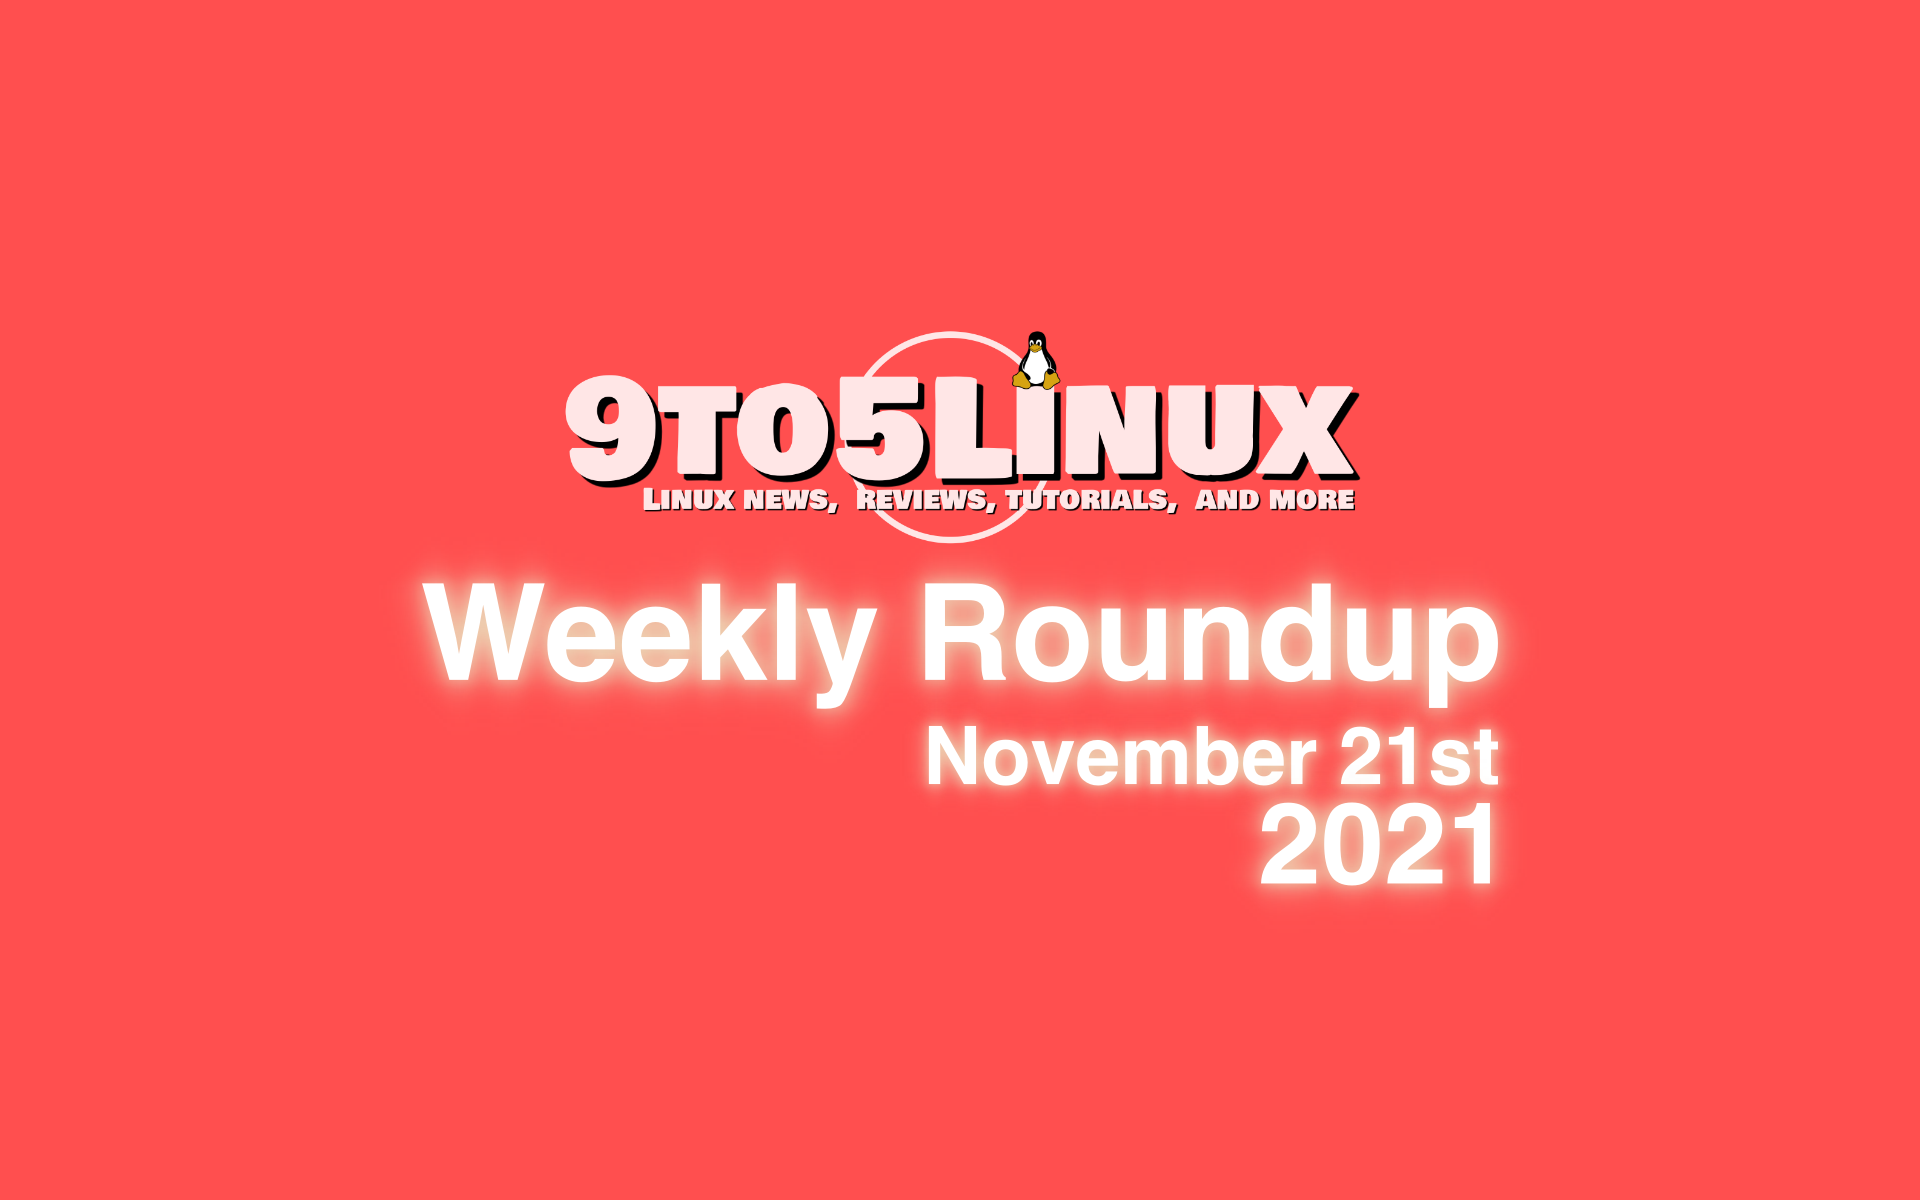 9to5Linux Weekly Roundup: November 21st, 2021